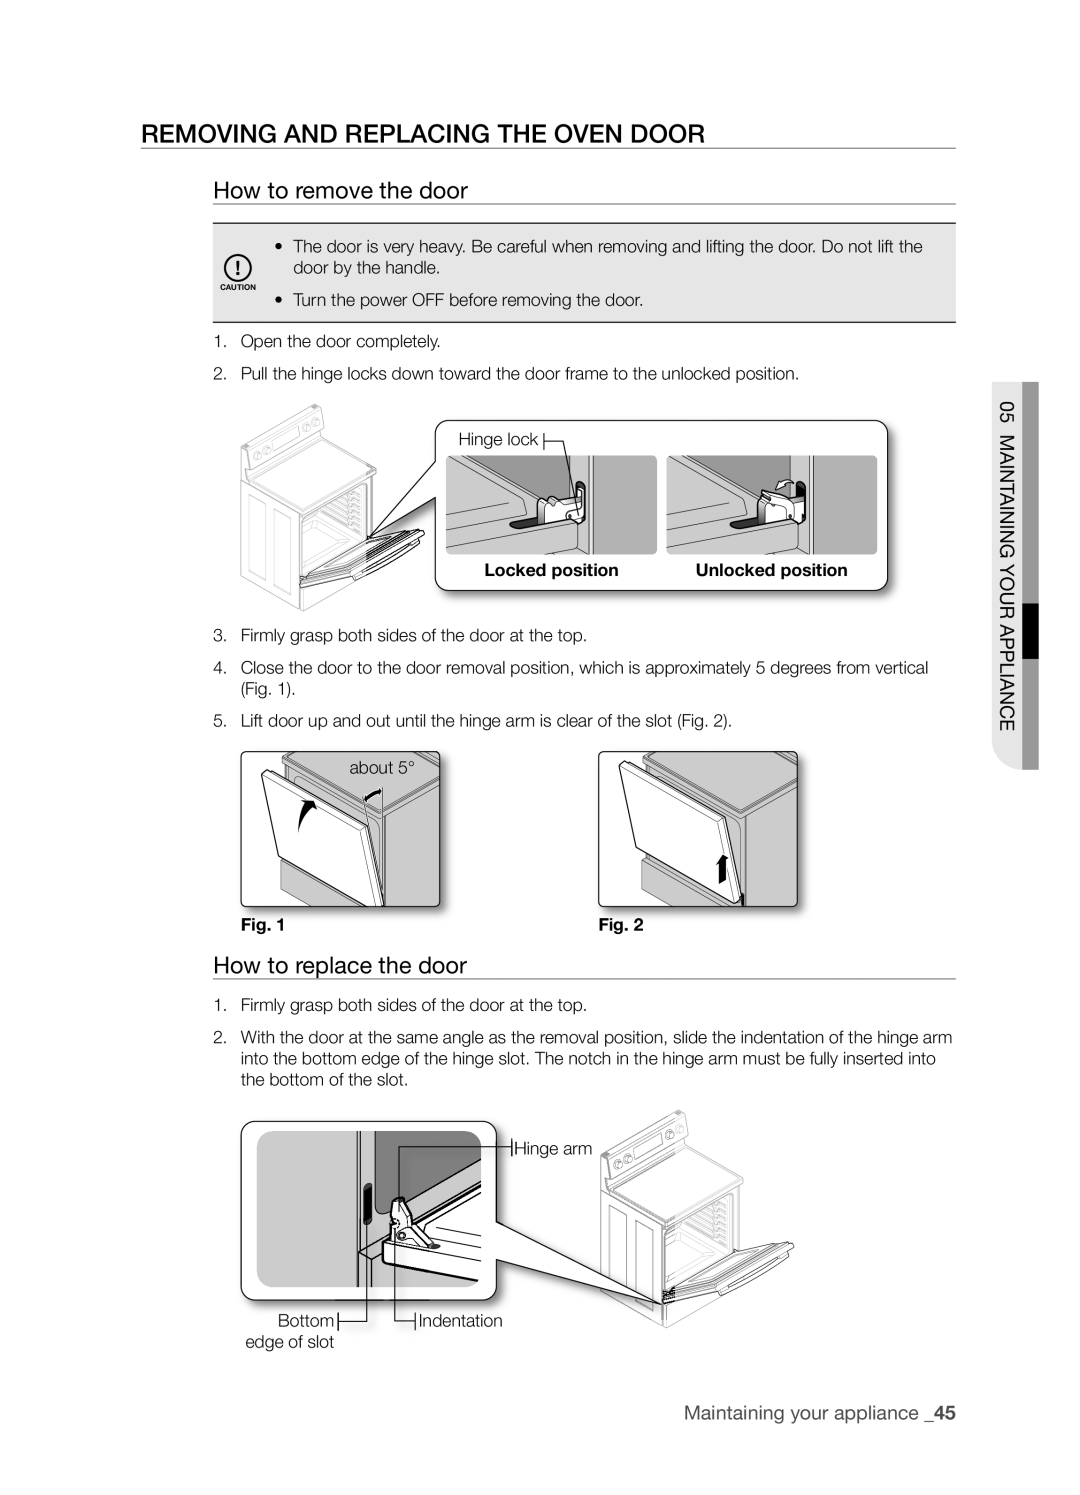 Samsung FTQ352IWX user manual Removing And Replacing The Oven Door, How to remove the door, How to replace the door 